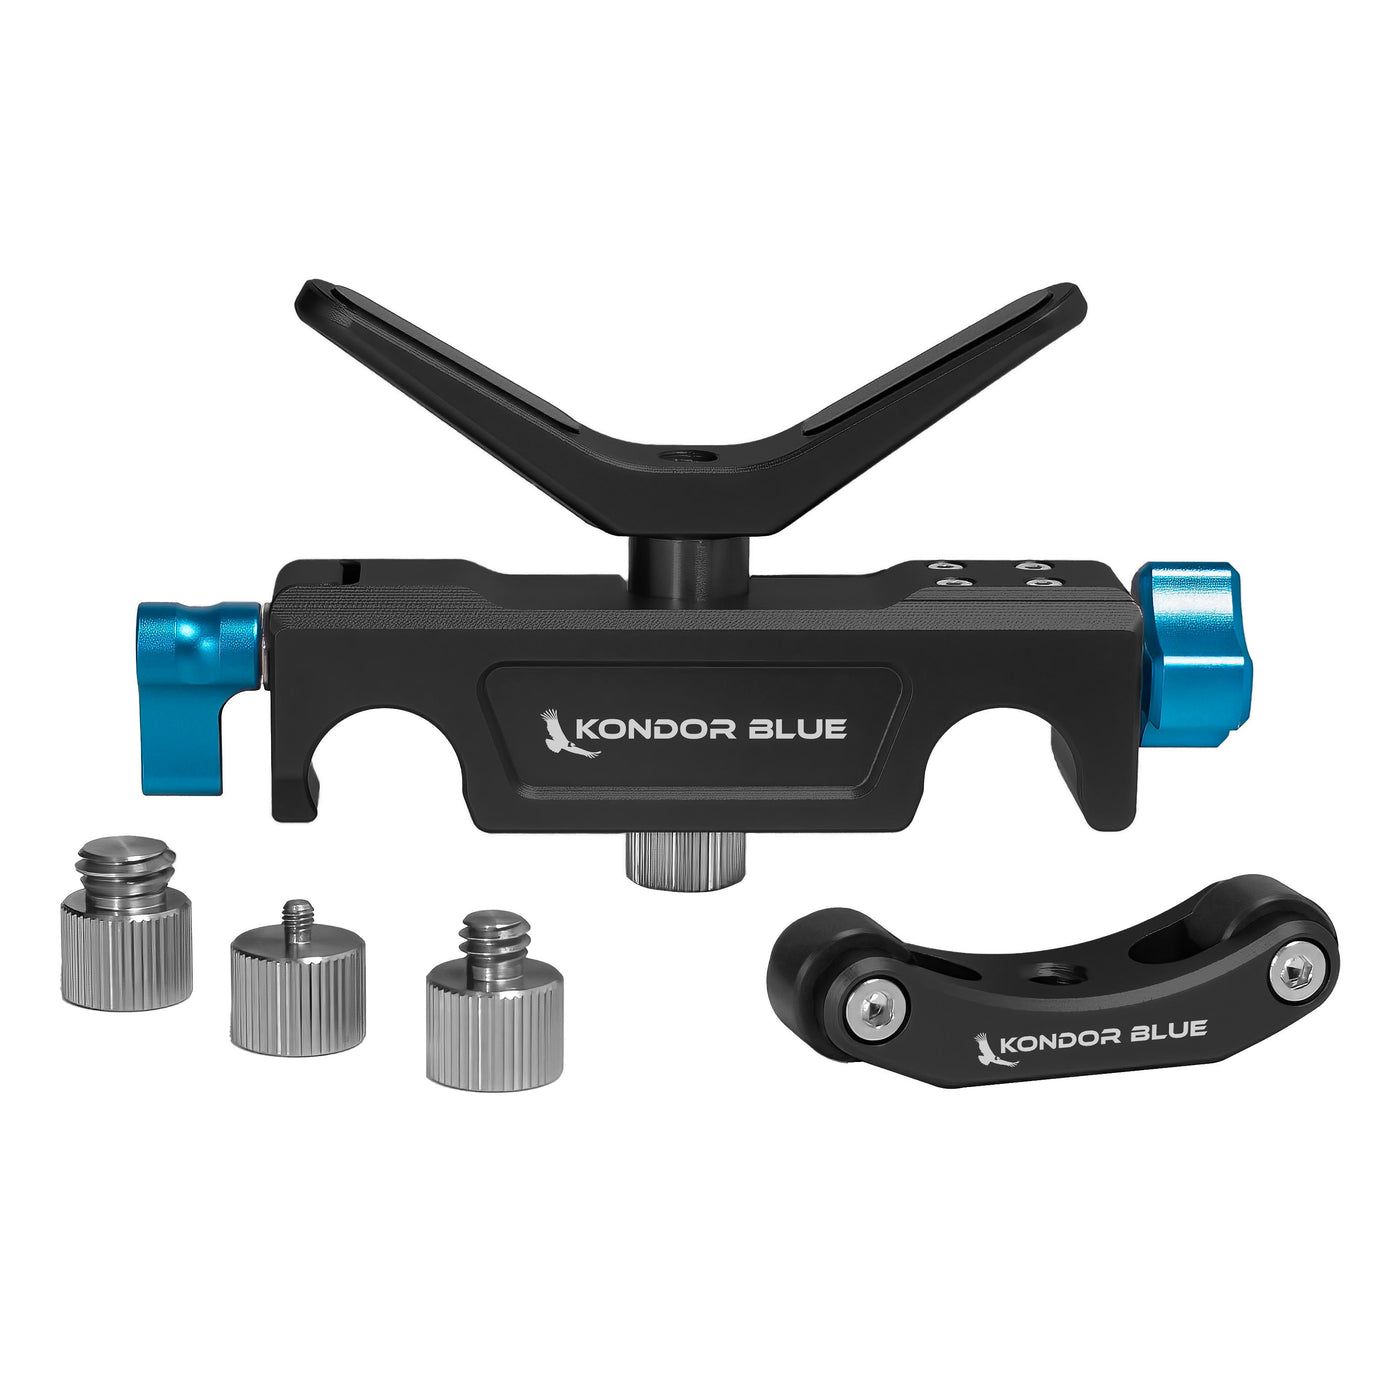 Universal Lens Support Kit for LWS 15mm Rods